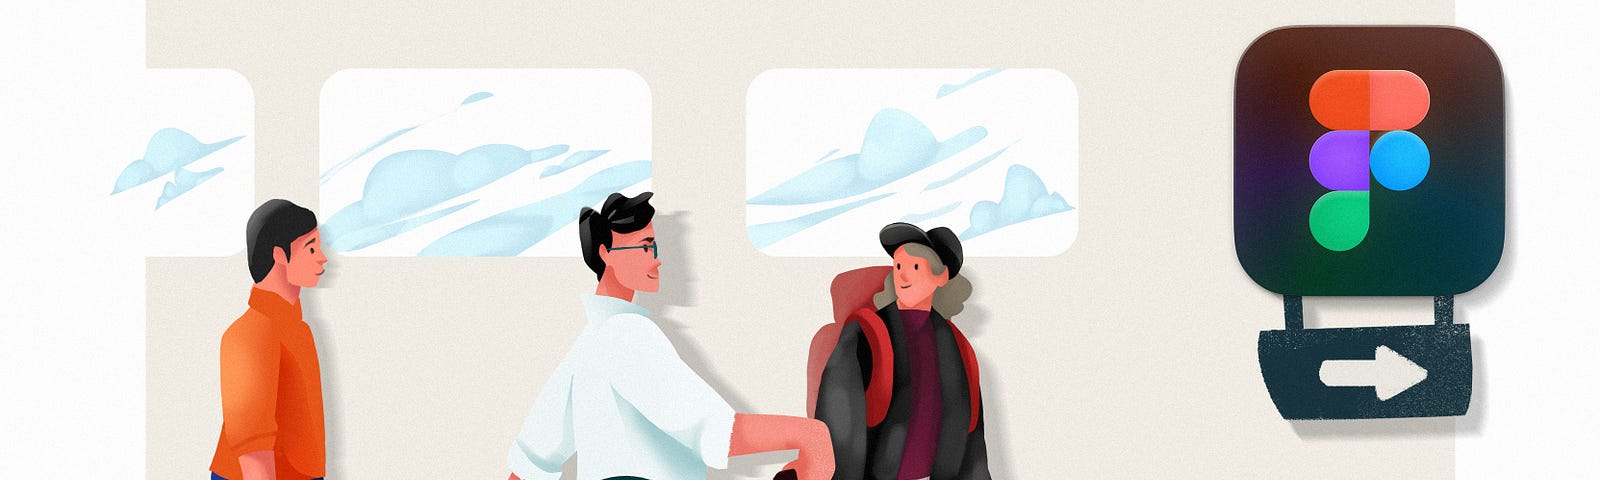 An illustration of three passengers with a sign of Figma that shows the path